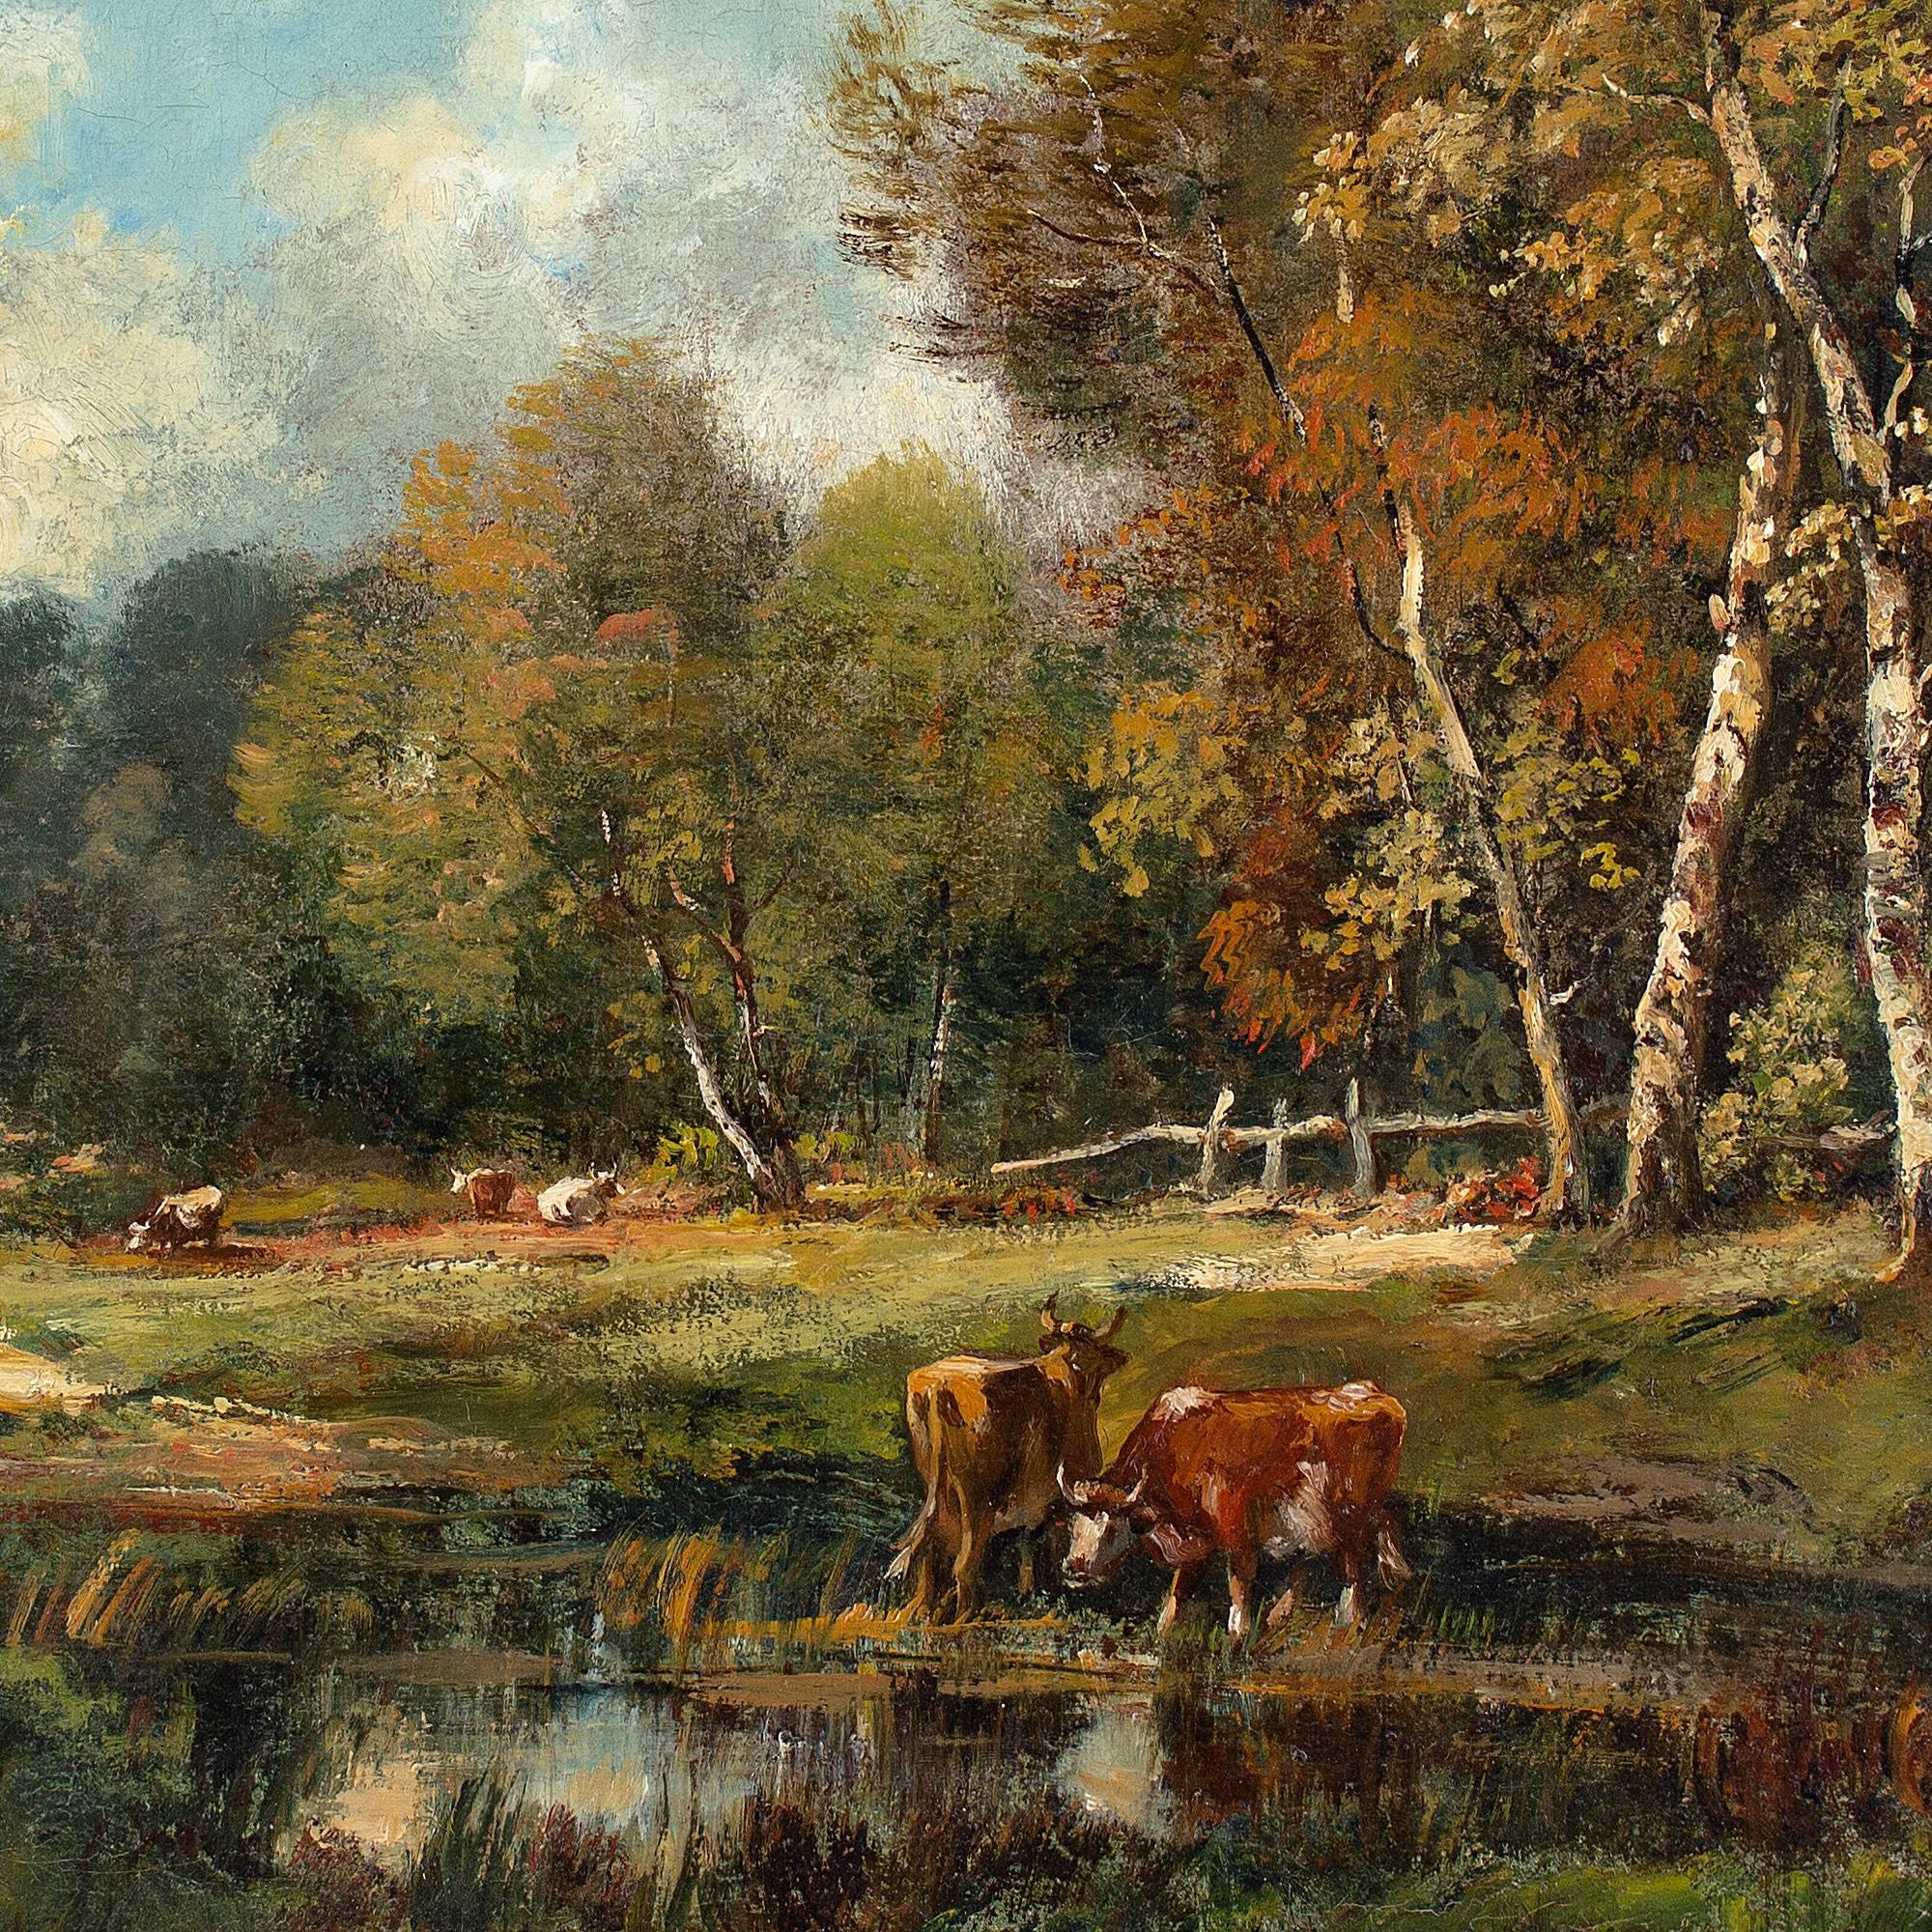 This late 19th-century oil painting by French artist Camille Magnus (1853-1894) depicts a picturesque forest landscape with cattle taking water at a pond. Towering birch trees guide the eye towards a distant wandering figure.

Camille Magnus